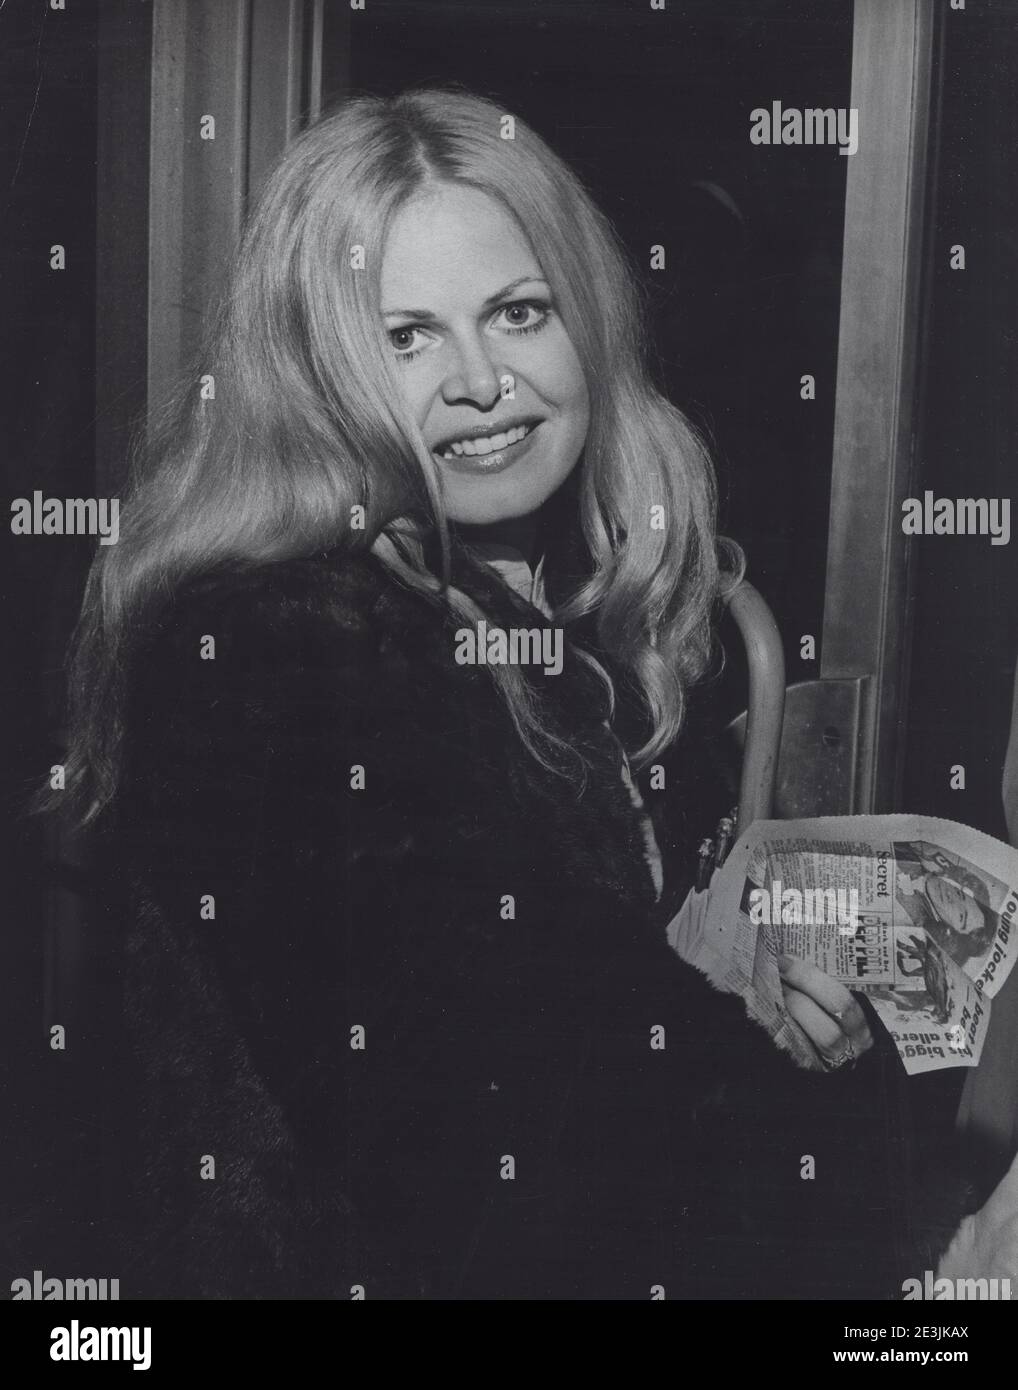 Images of sally struthers